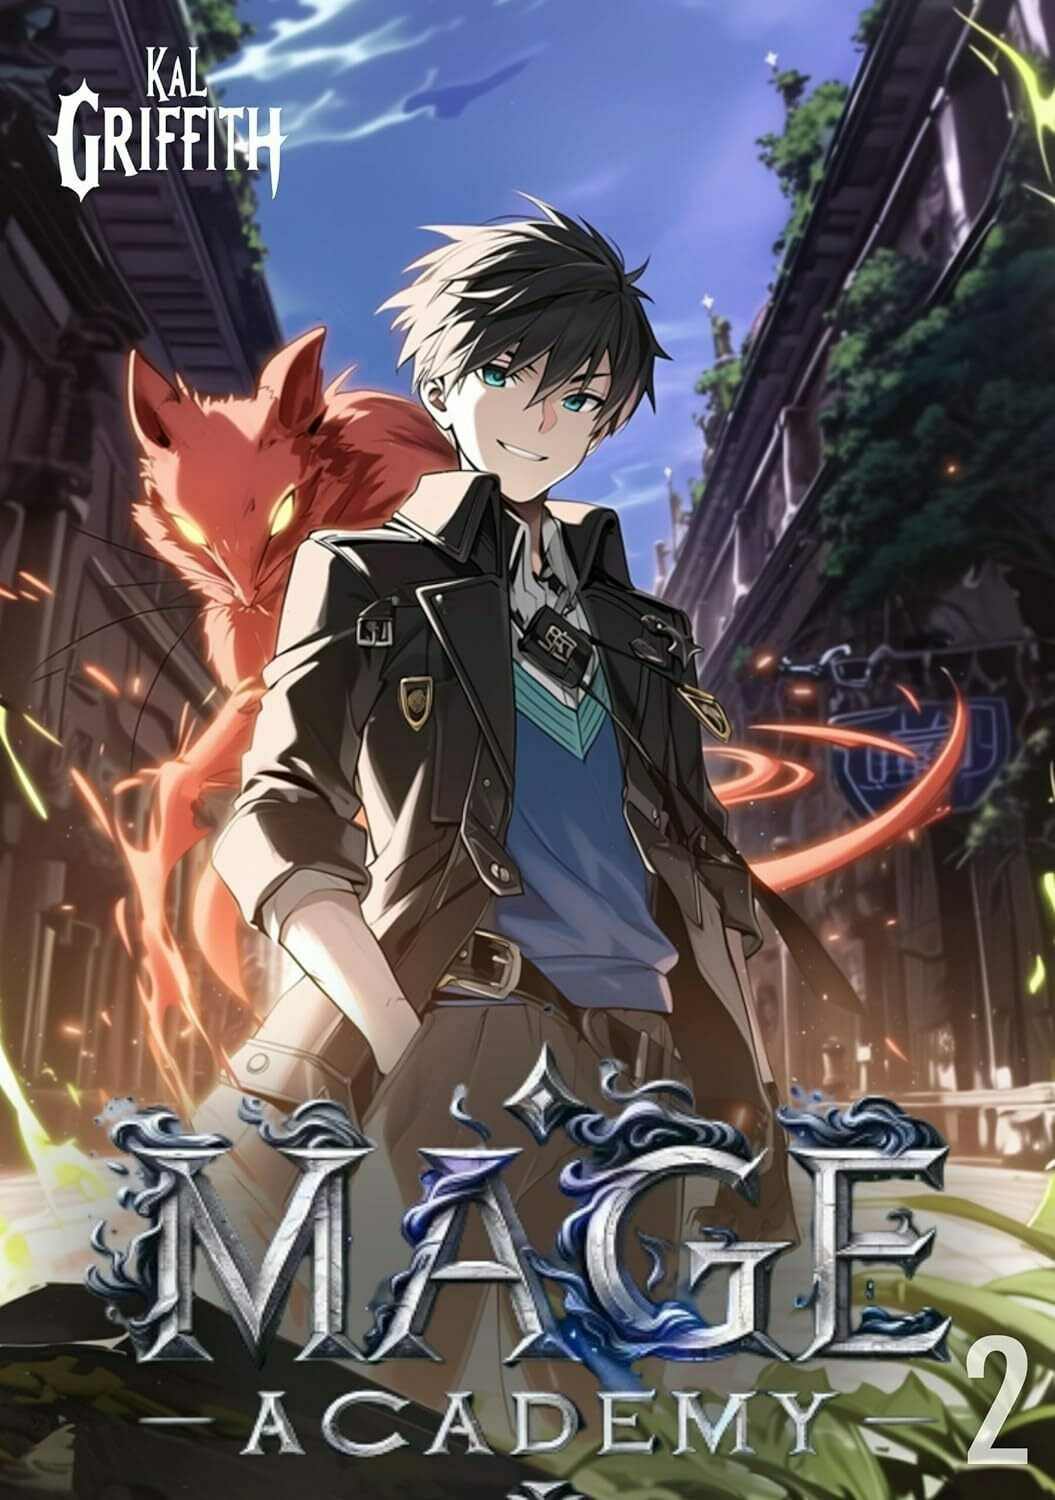 A young male anime character smiles alongside a red fox with glowing eyes, against an urban backdrop with magical elements. Text: 'KAL GRIFFITH' 'MAGE ACADEMY 2'.